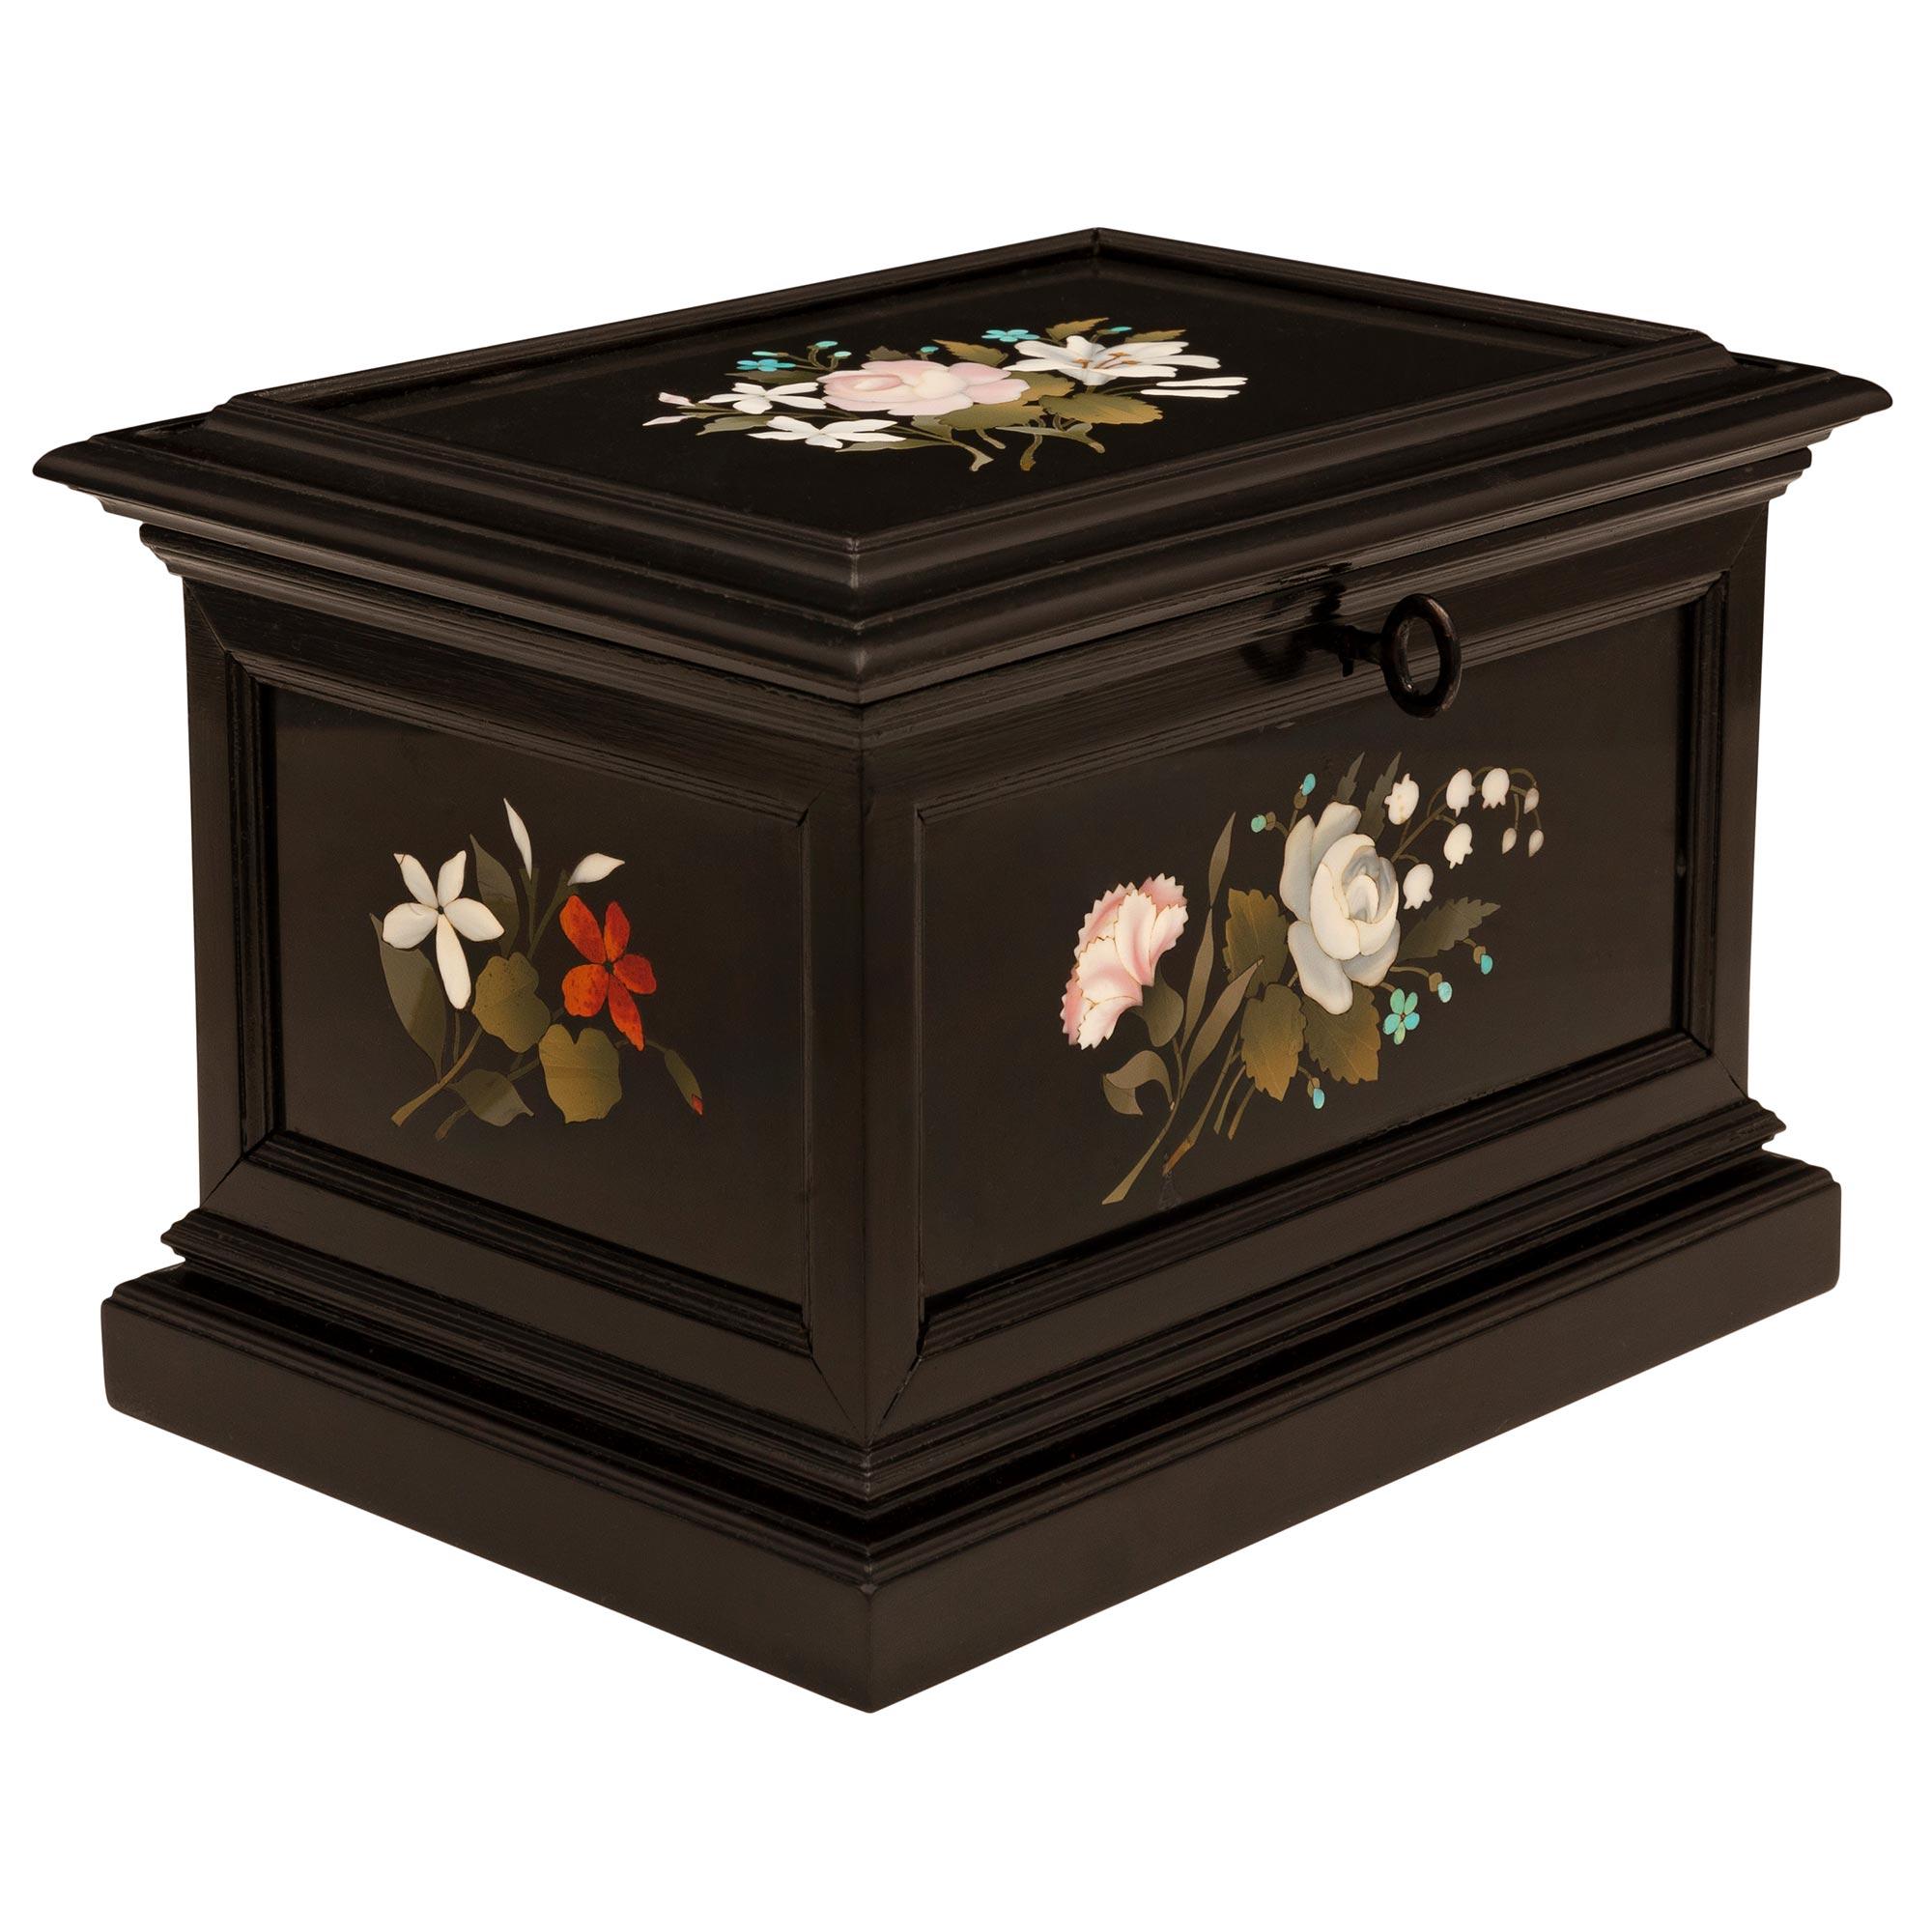 A charming and extremely decorative Italian 19th century Florentine st. Ebony and Pietra Dura marble box. The box is raised by an elegant stepped mottled base with striking wonderfully executed Pietra Dura plaques at each side. Each plaque displays